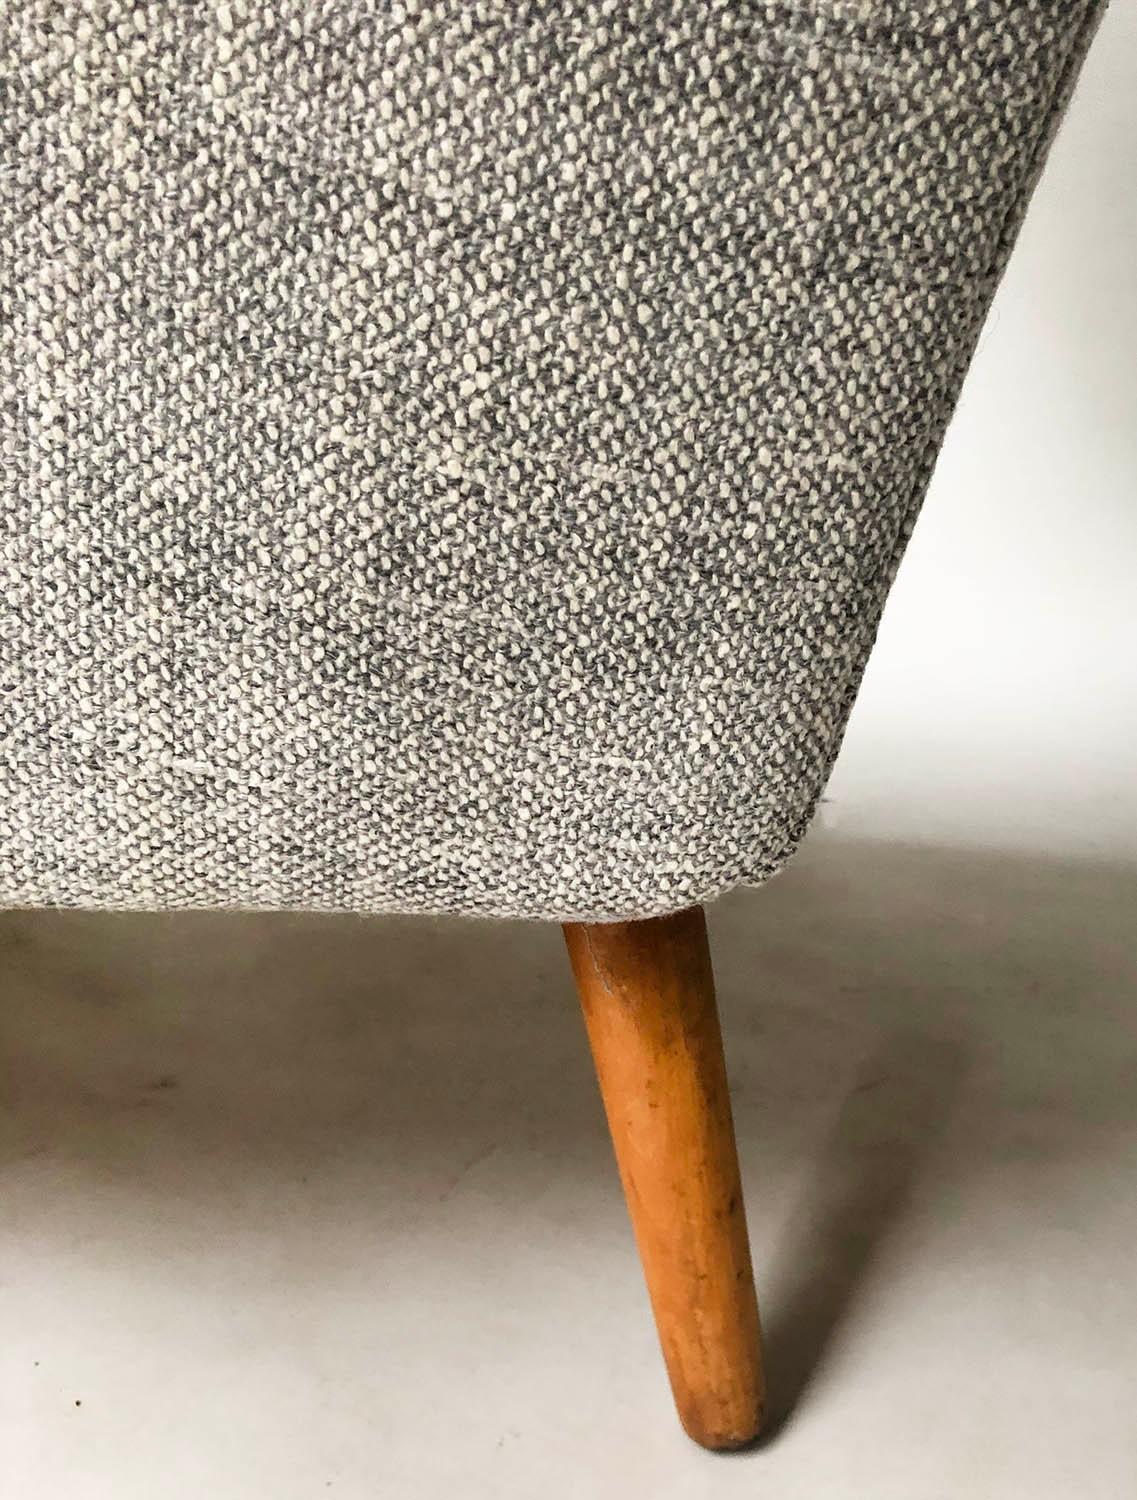 HOWARD KEITH ARMCHAIR, 1950's lounge chair newly upholstered in oatmeal soft tweed with splay - Image 4 of 5